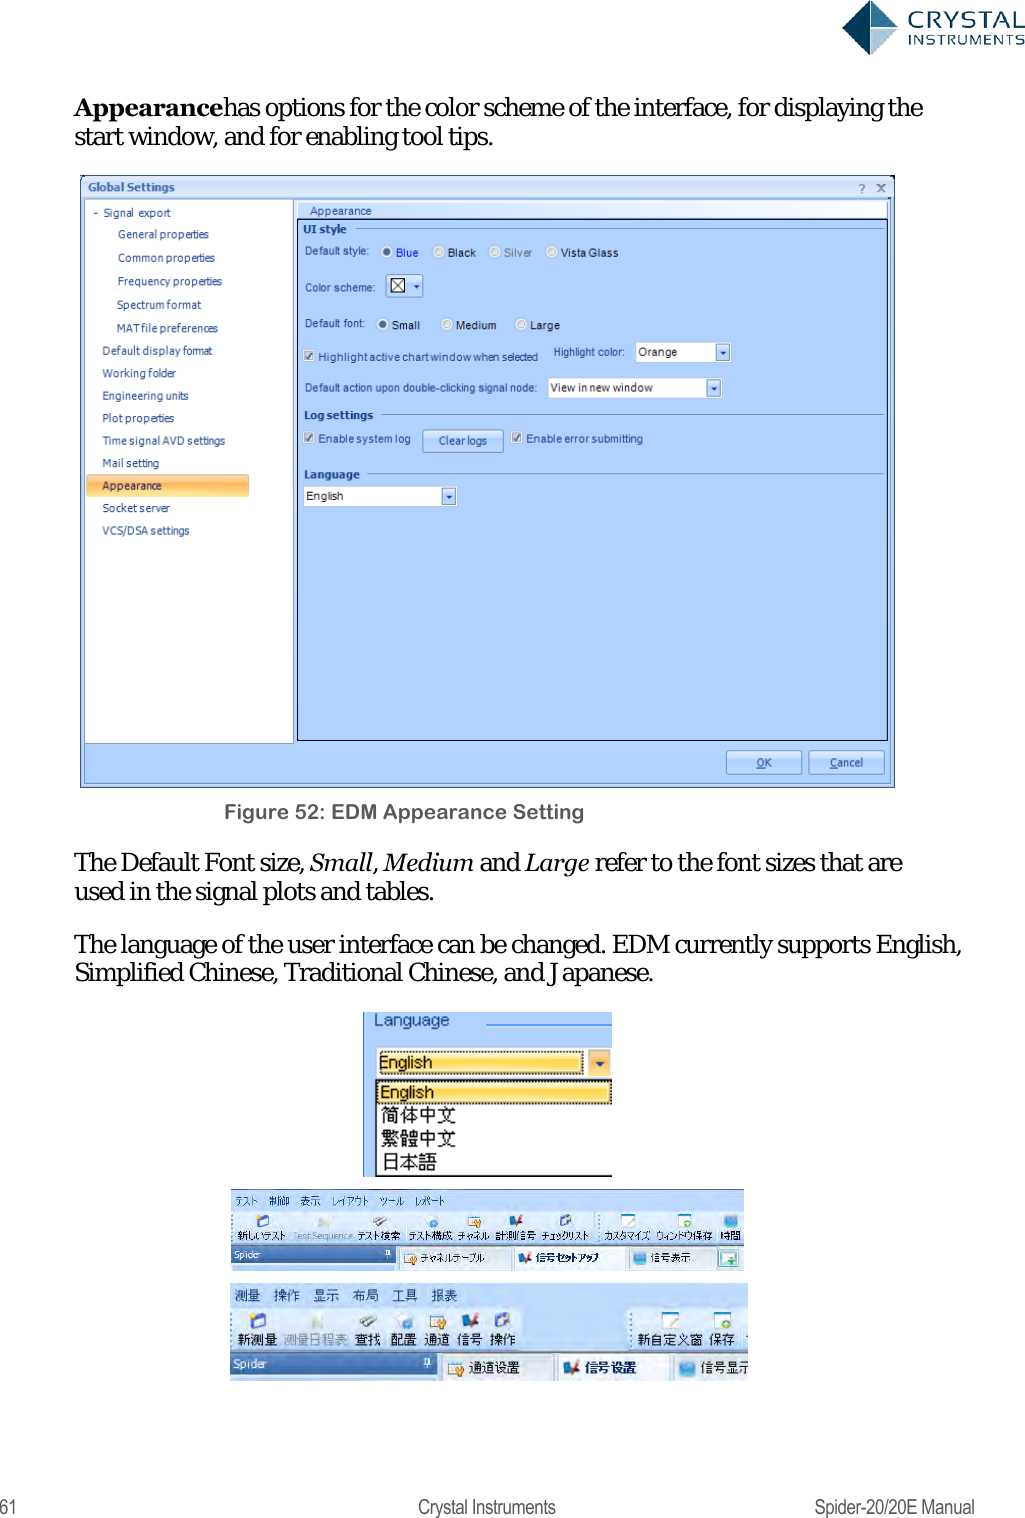  61  Crystal Instruments  Spider-20/20E Manual Appearancehas options for the color scheme of the interface, for displaying the start window, and for enabling tool tips.  Figure 52: EDM Appearance Setting The Default Font size, Small, Medium and Large refer to the font sizes that are used in the signal plots and tables.  The language of the user interface can be changed. EDM currently supports English, Simplified Chinese, Traditional Chinese, and Japanese.     